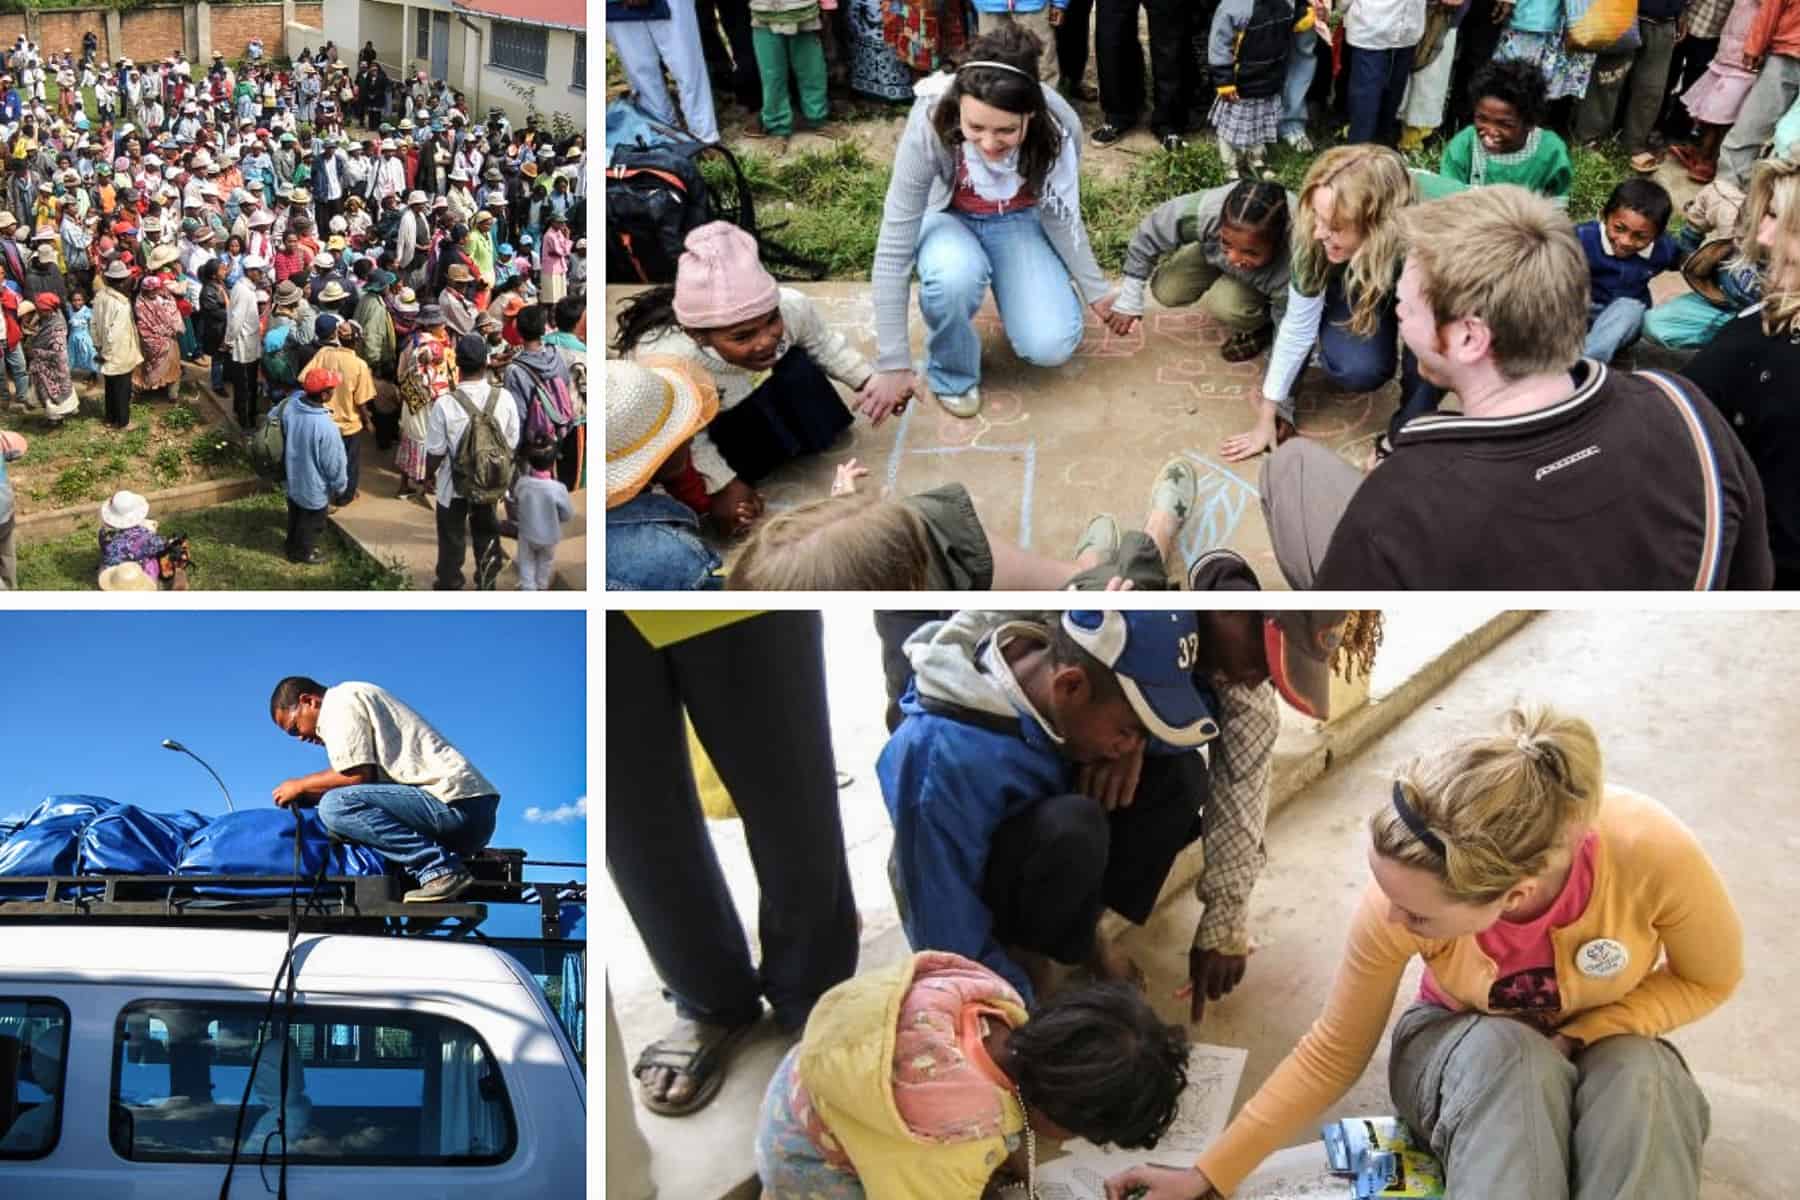 A series of images from a Madagascar volunteer trip showing a large group of people in a garden, volunteers playing with children, a man attaching backpacks to the top of a truck and a woman drawing with a young child. 